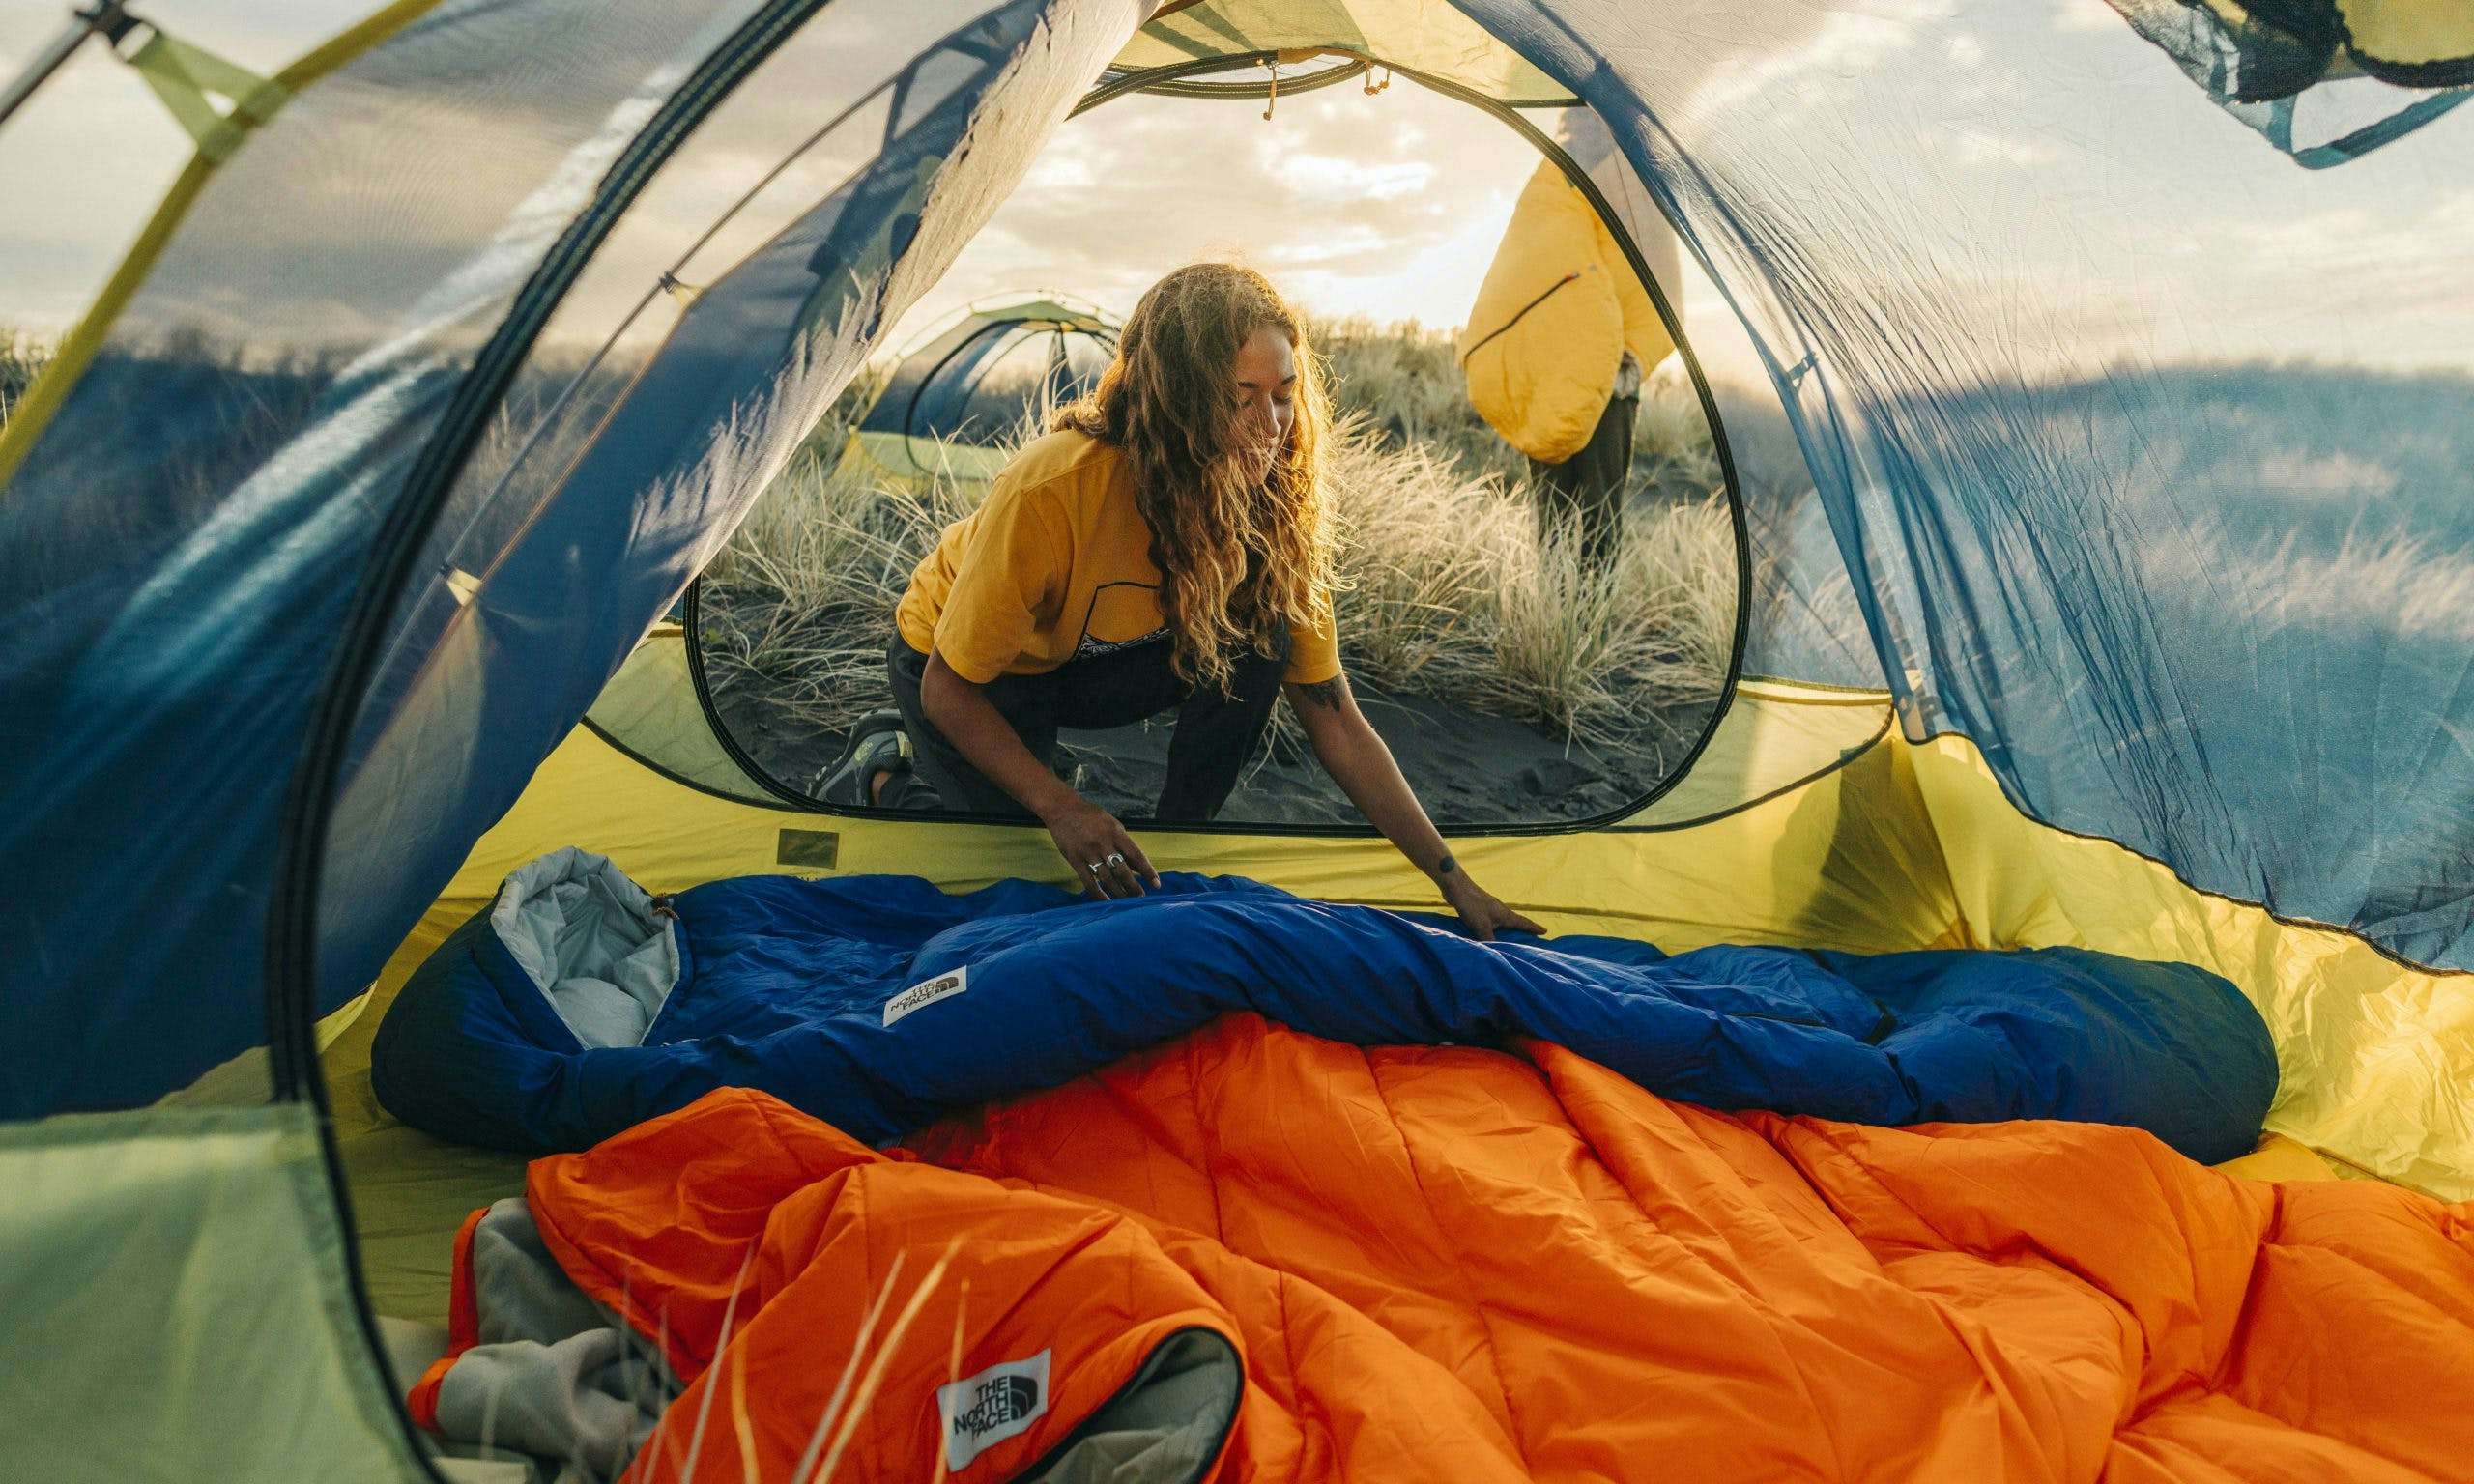 Camper arranging The North Face Eco Trail sleeping bags in a tent